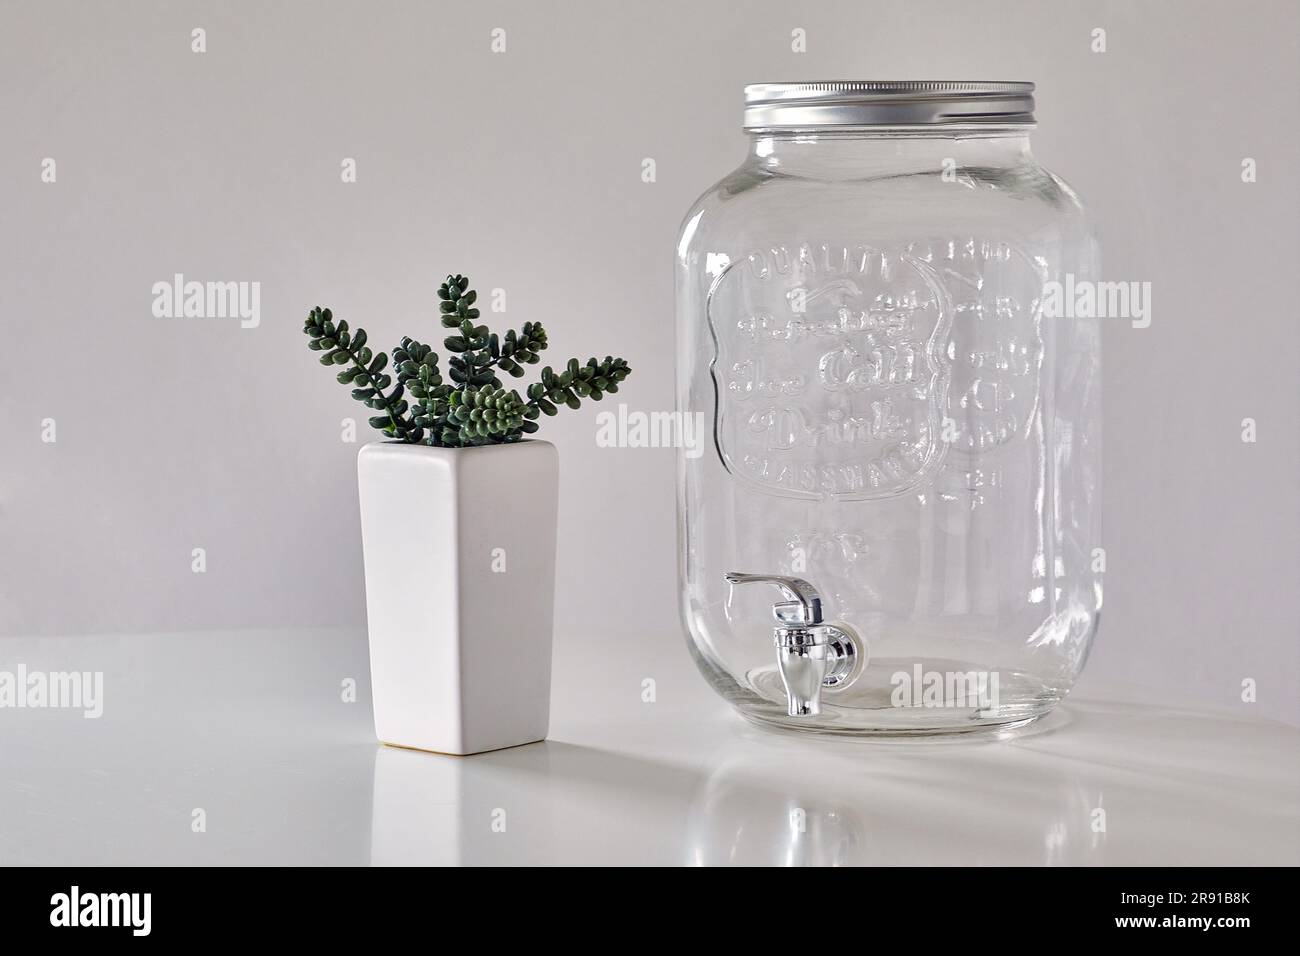 https://c8.alamy.com/comp/2R91B8K/white-table-with-succulent-plant-in-a-white-pot-and-empty-glass-water-dispenser-against-a-white-wall-2R91B8K.jpg